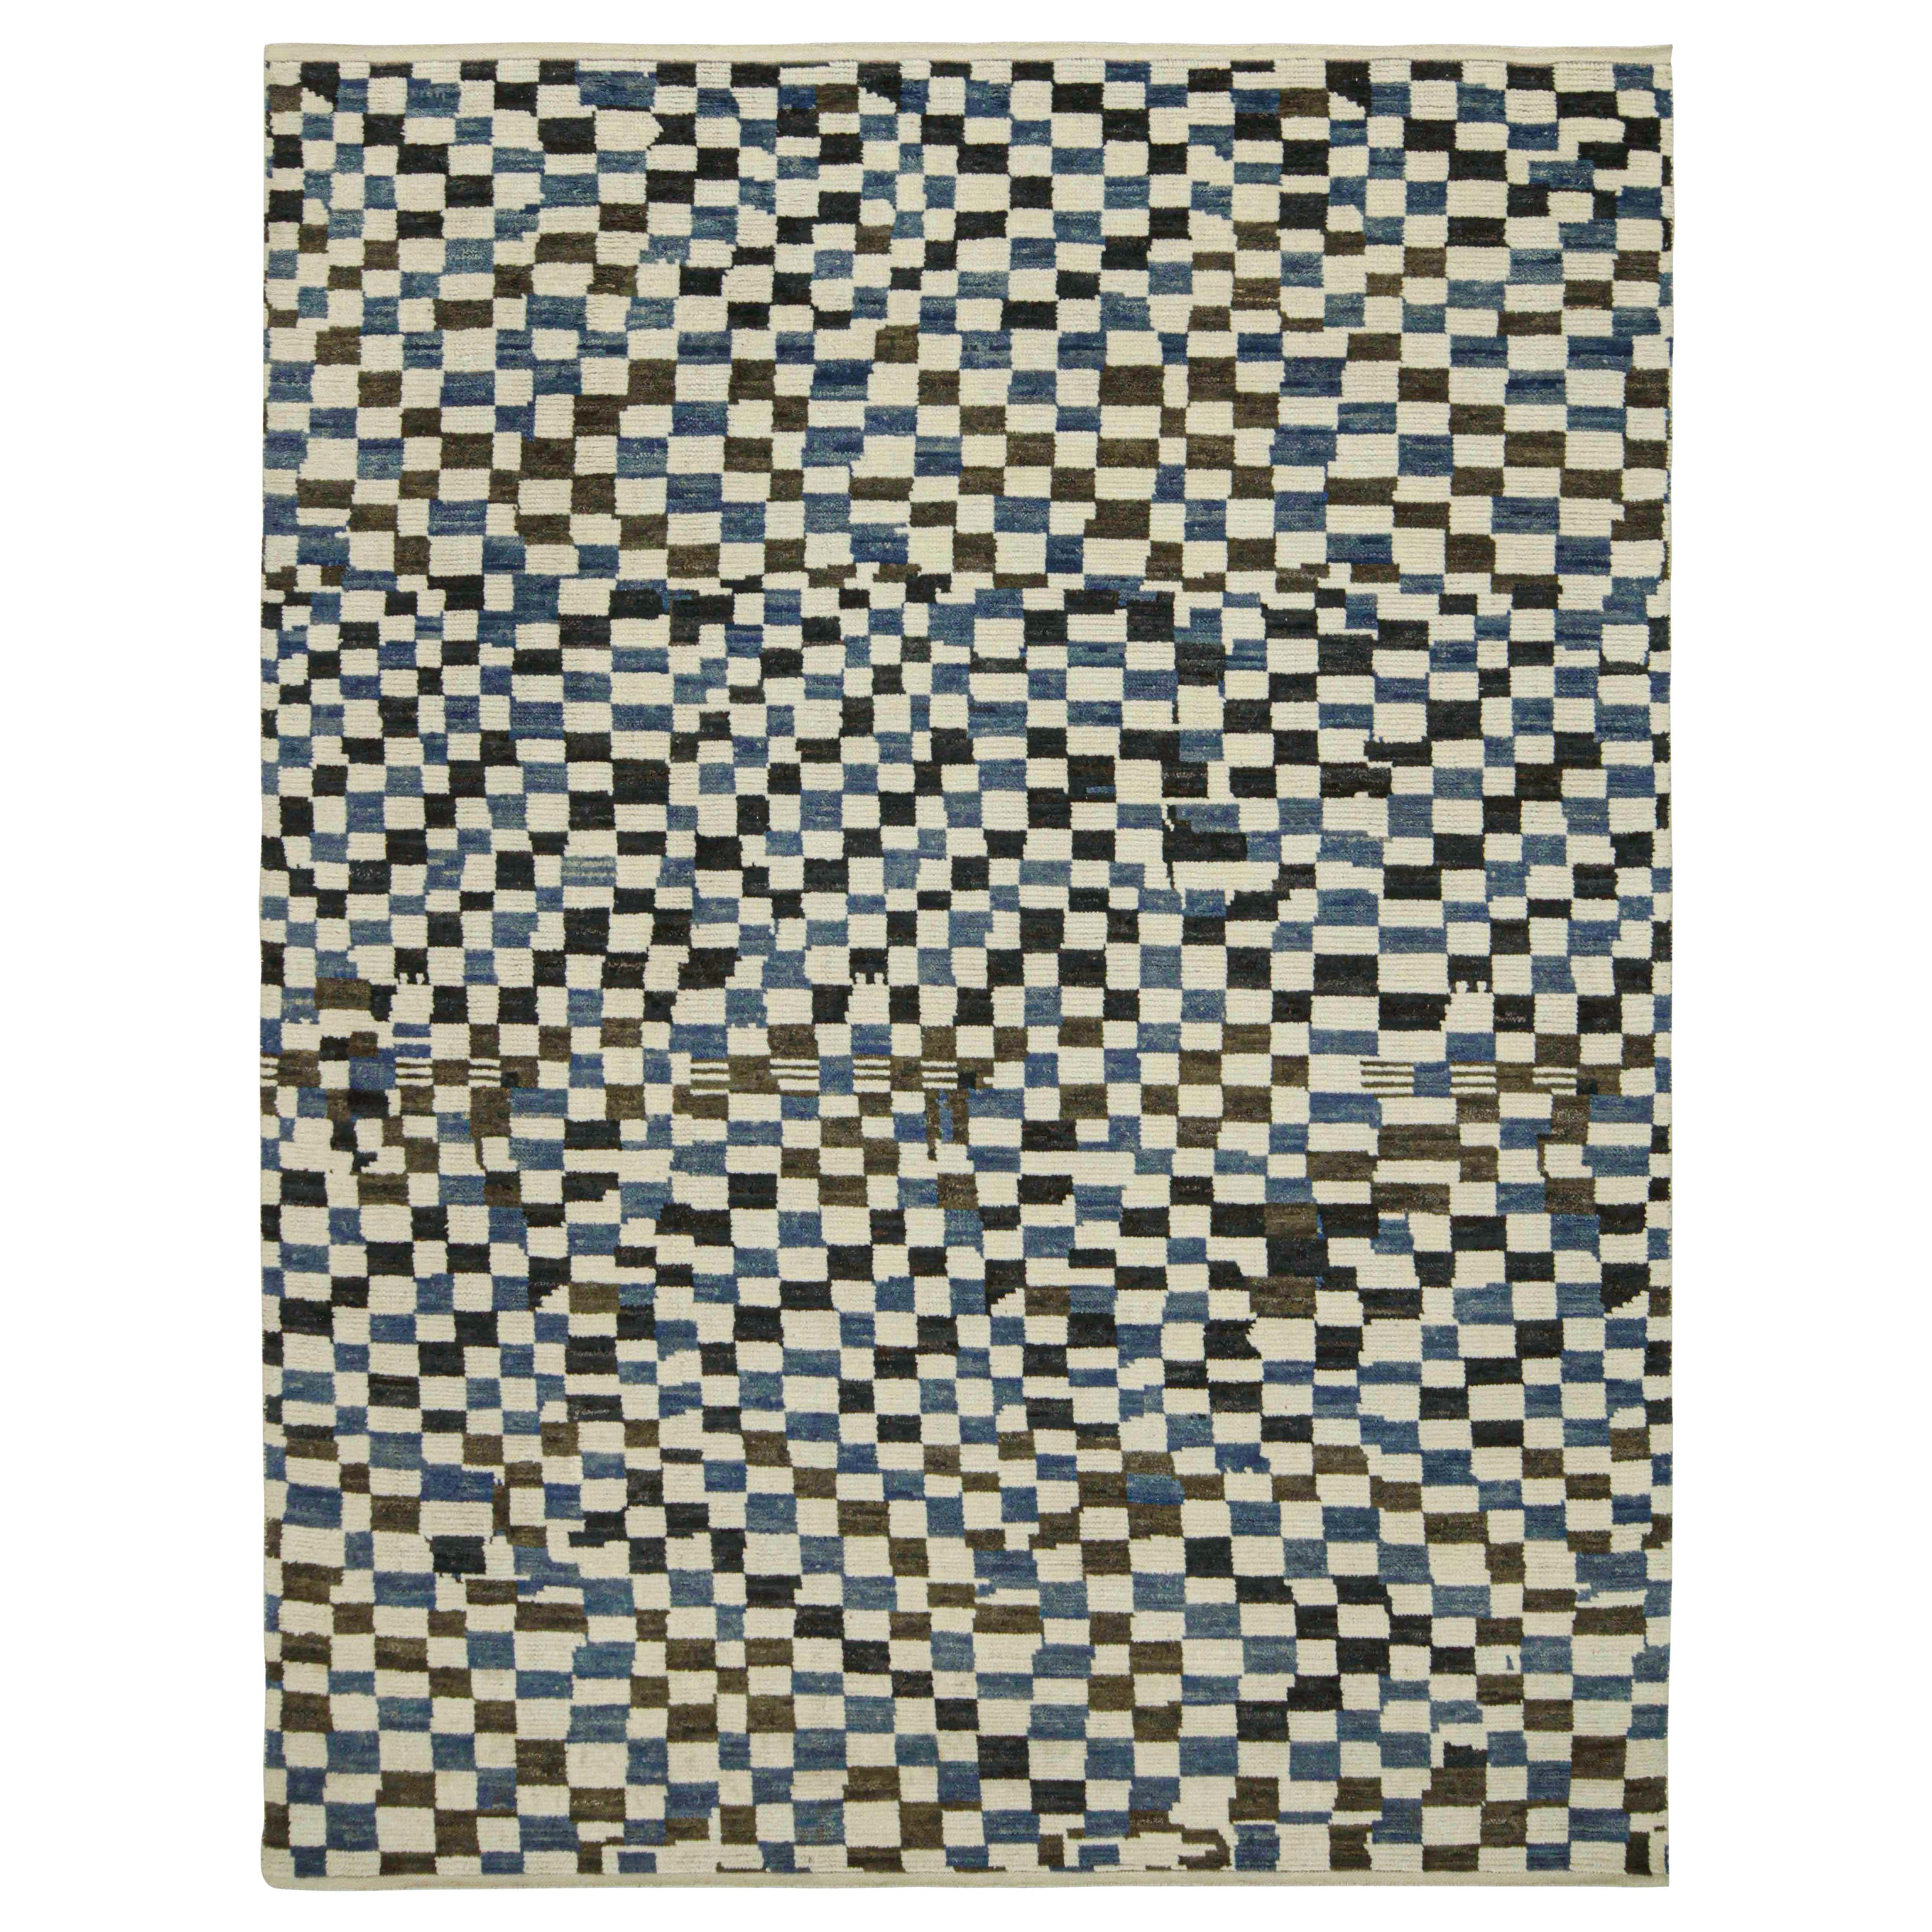 Rug & Kilim’s Moroccan Style Rug in White, Blue and Brown Checkered Pattern